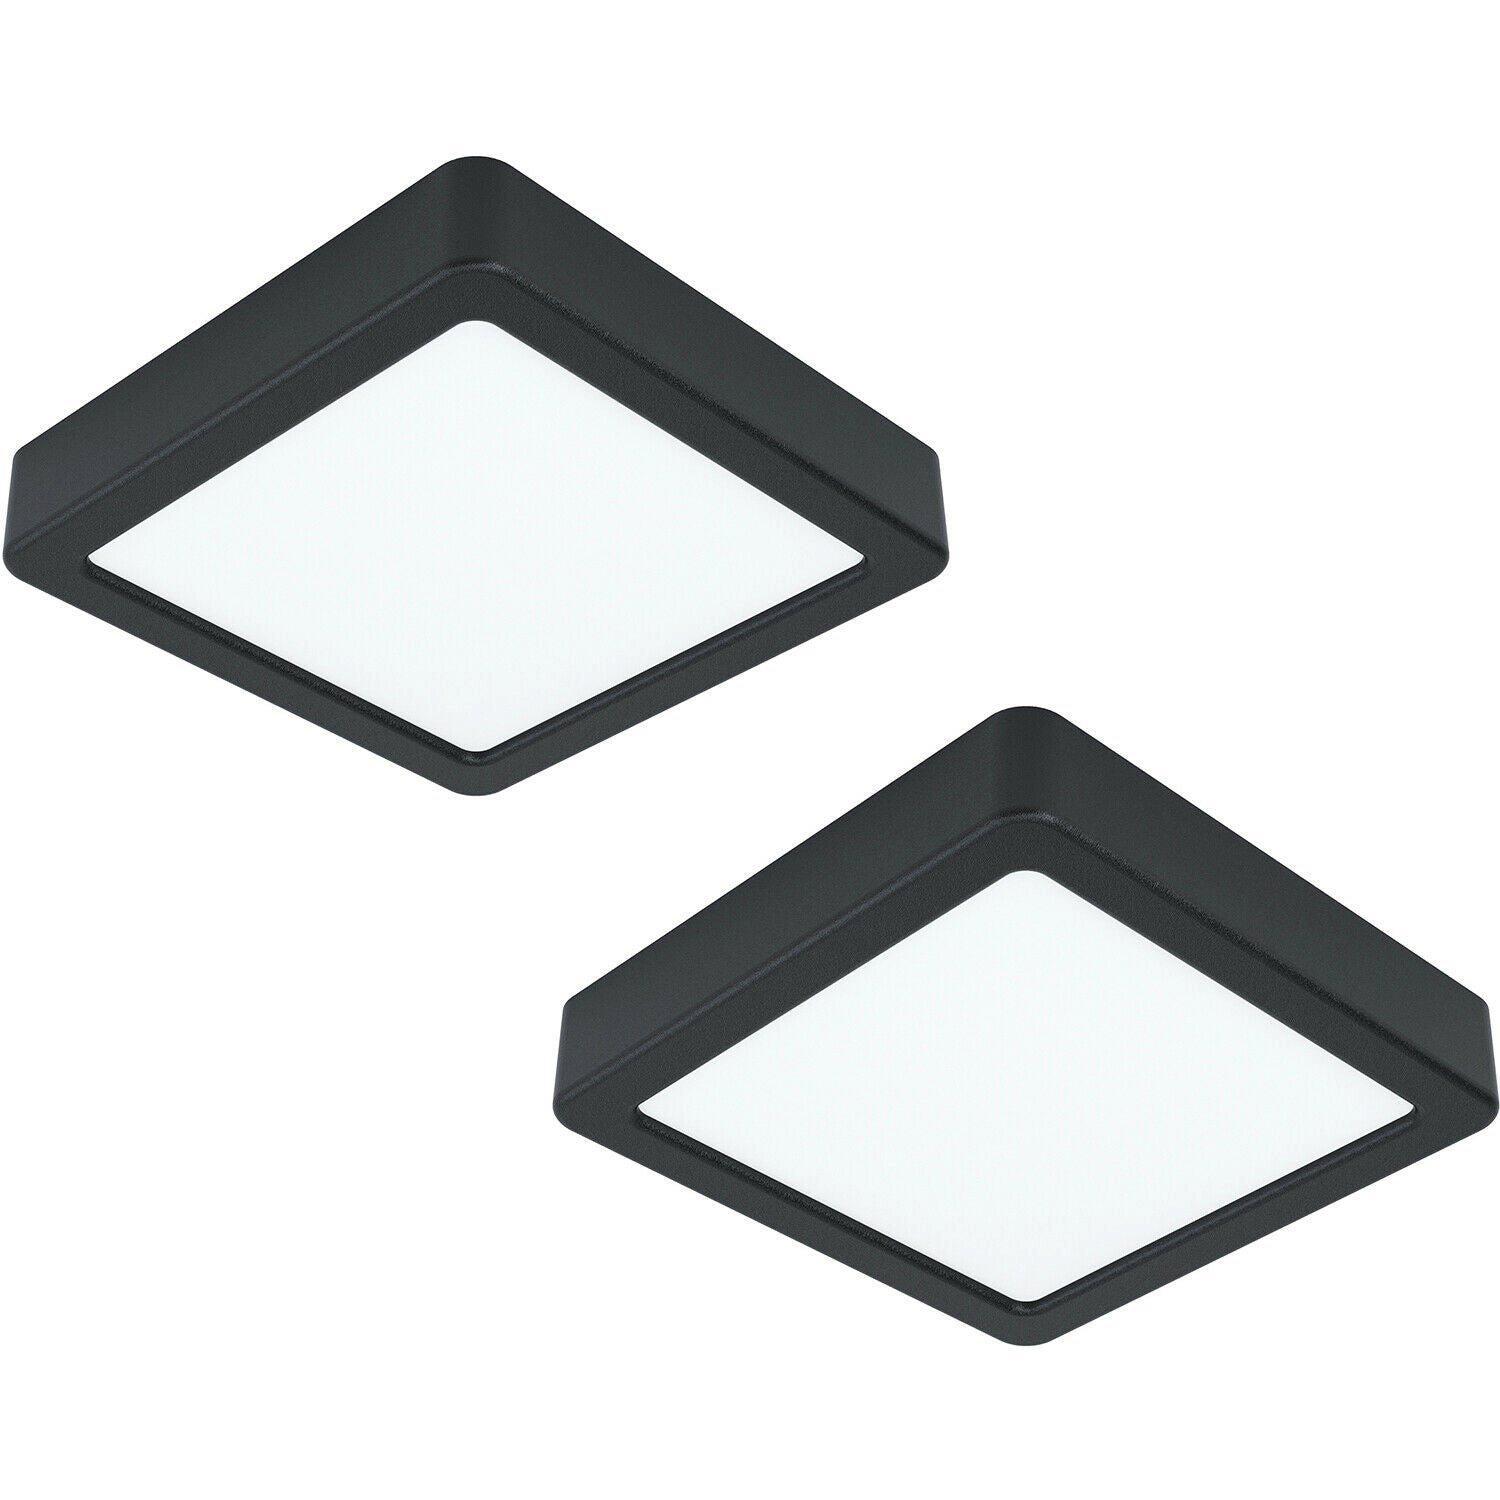 2 PACK Wall / Ceiling Light Black 160mm Sqaure Surface Mounted 10.5W LED 3000K